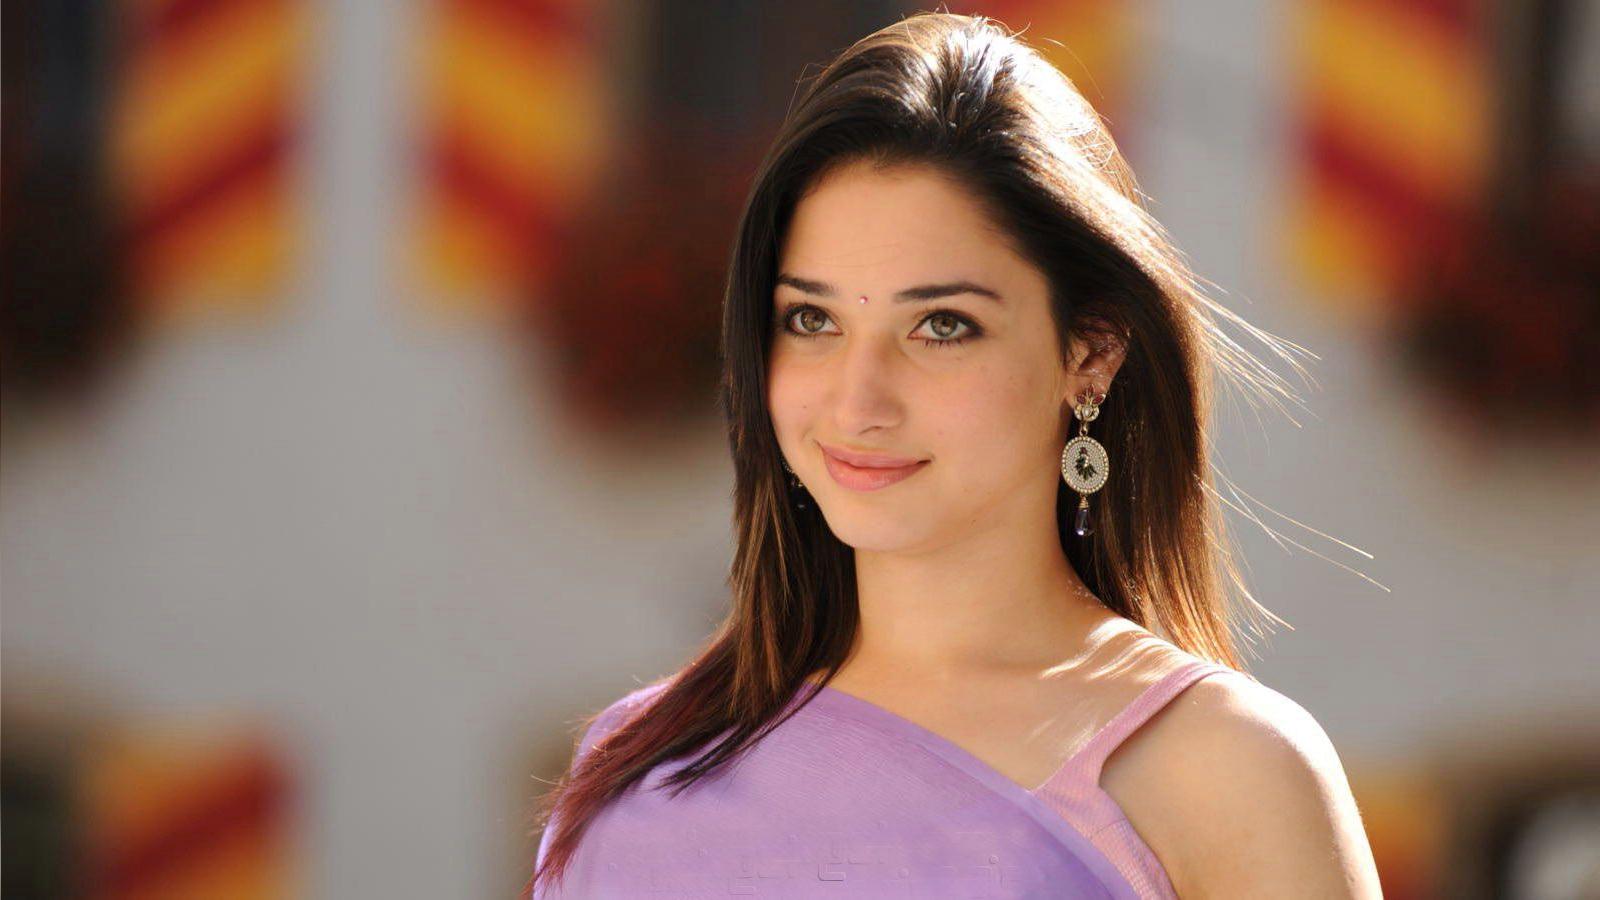 Tamanna Bhatia Biography Most Recent Pictures - Entertainment